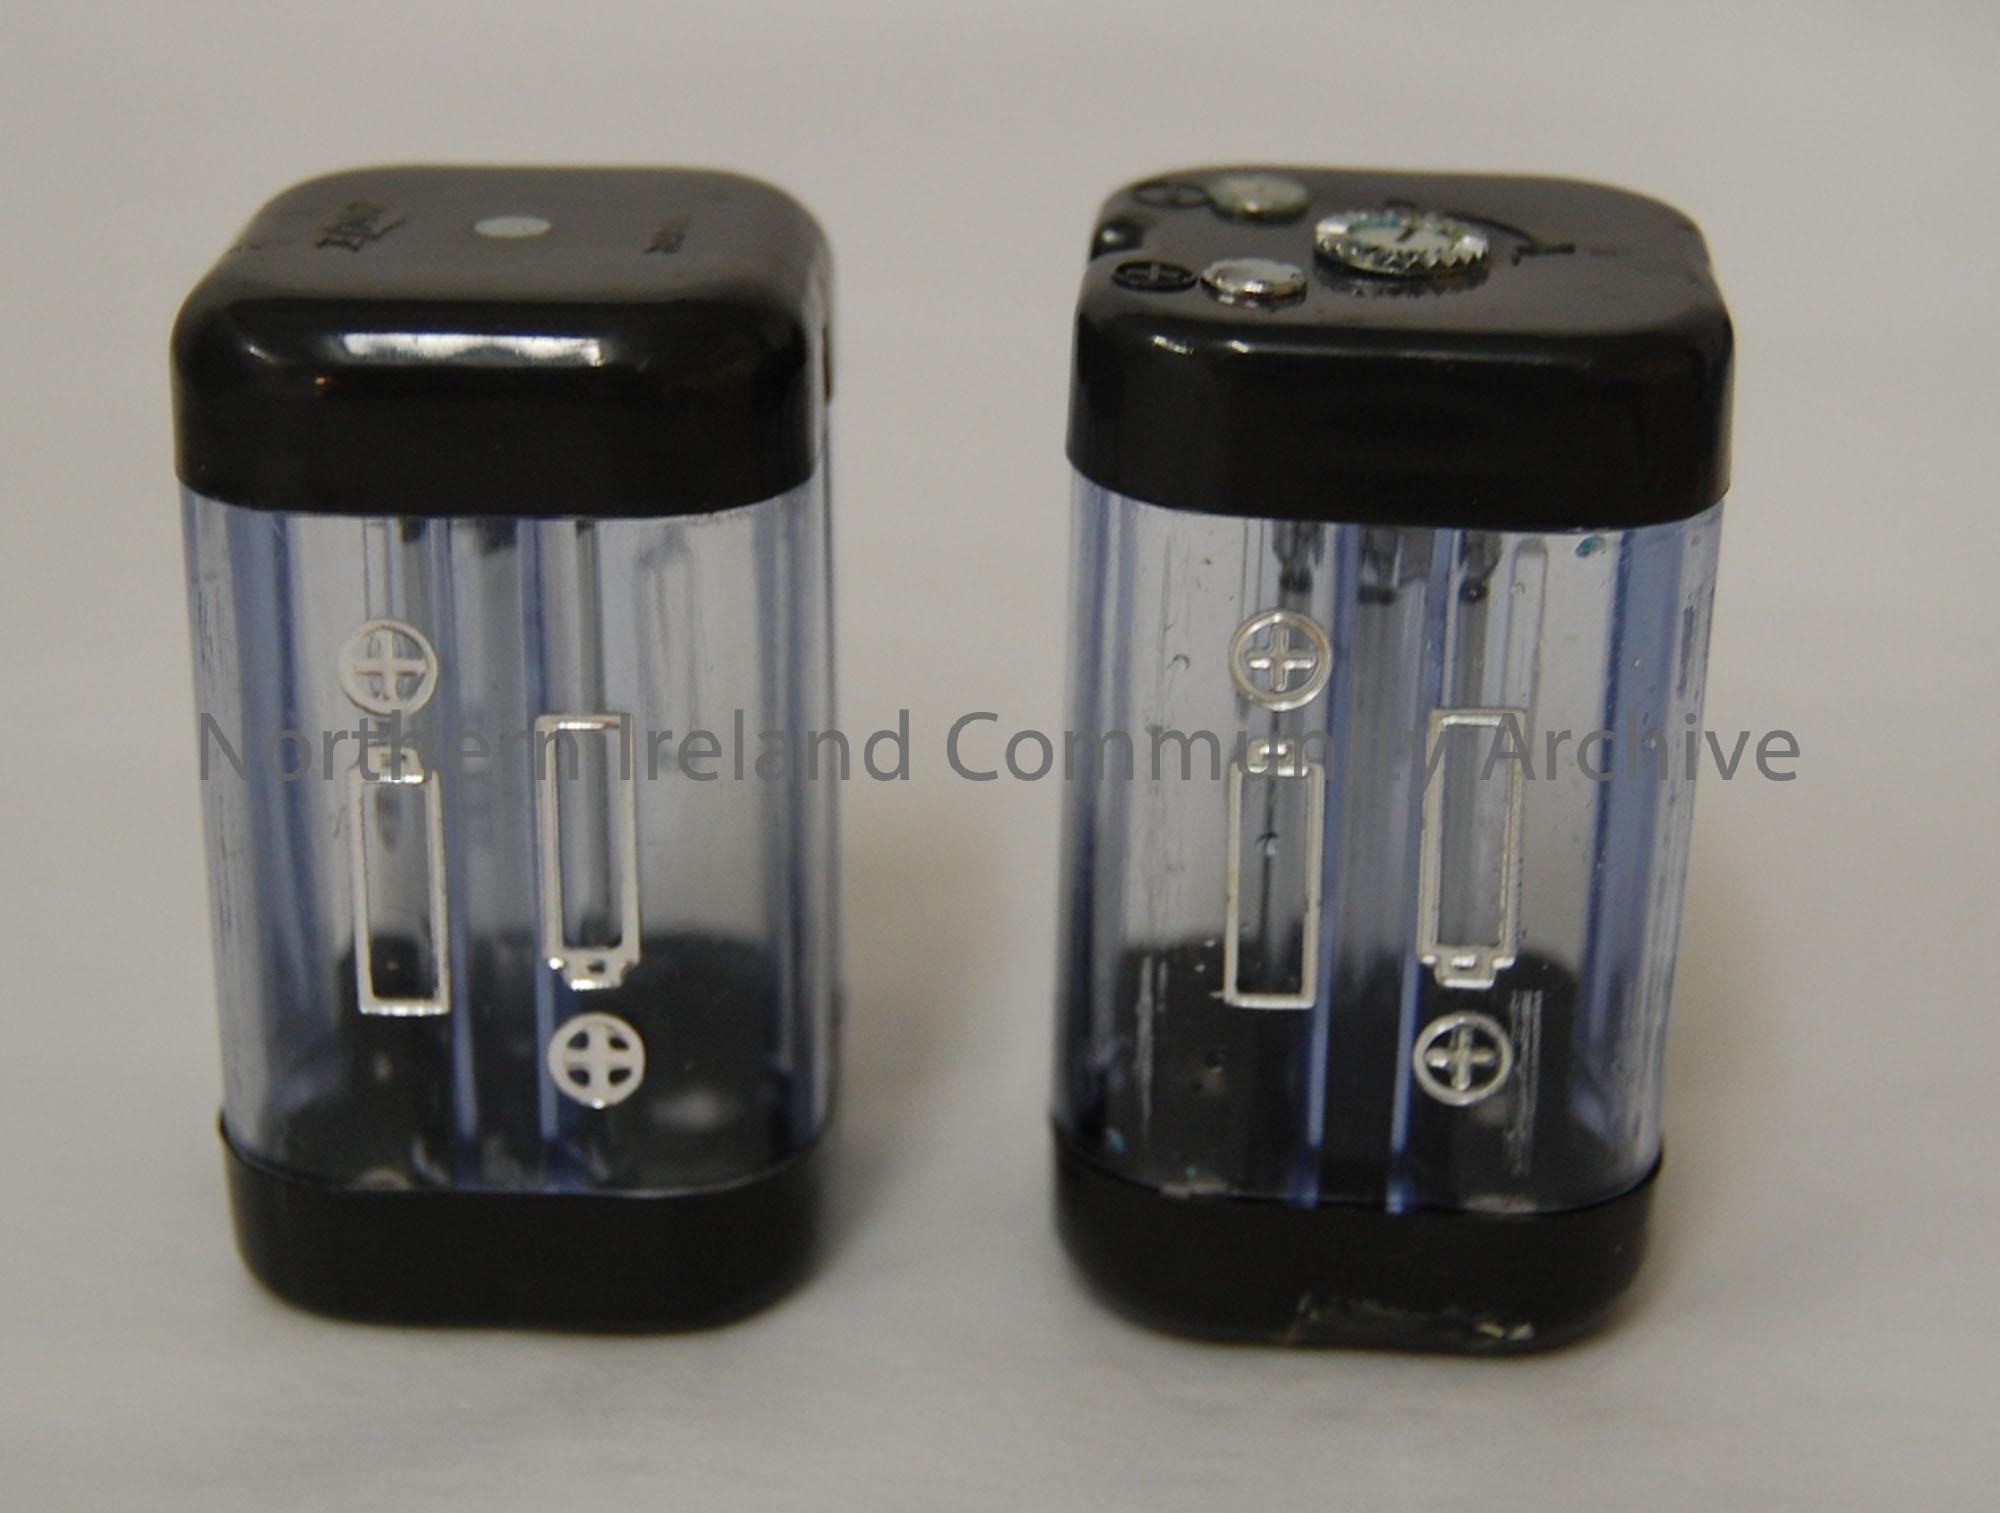 Elmo Battery cases. Takes four batteries, clear plastic, with black plastic at either end